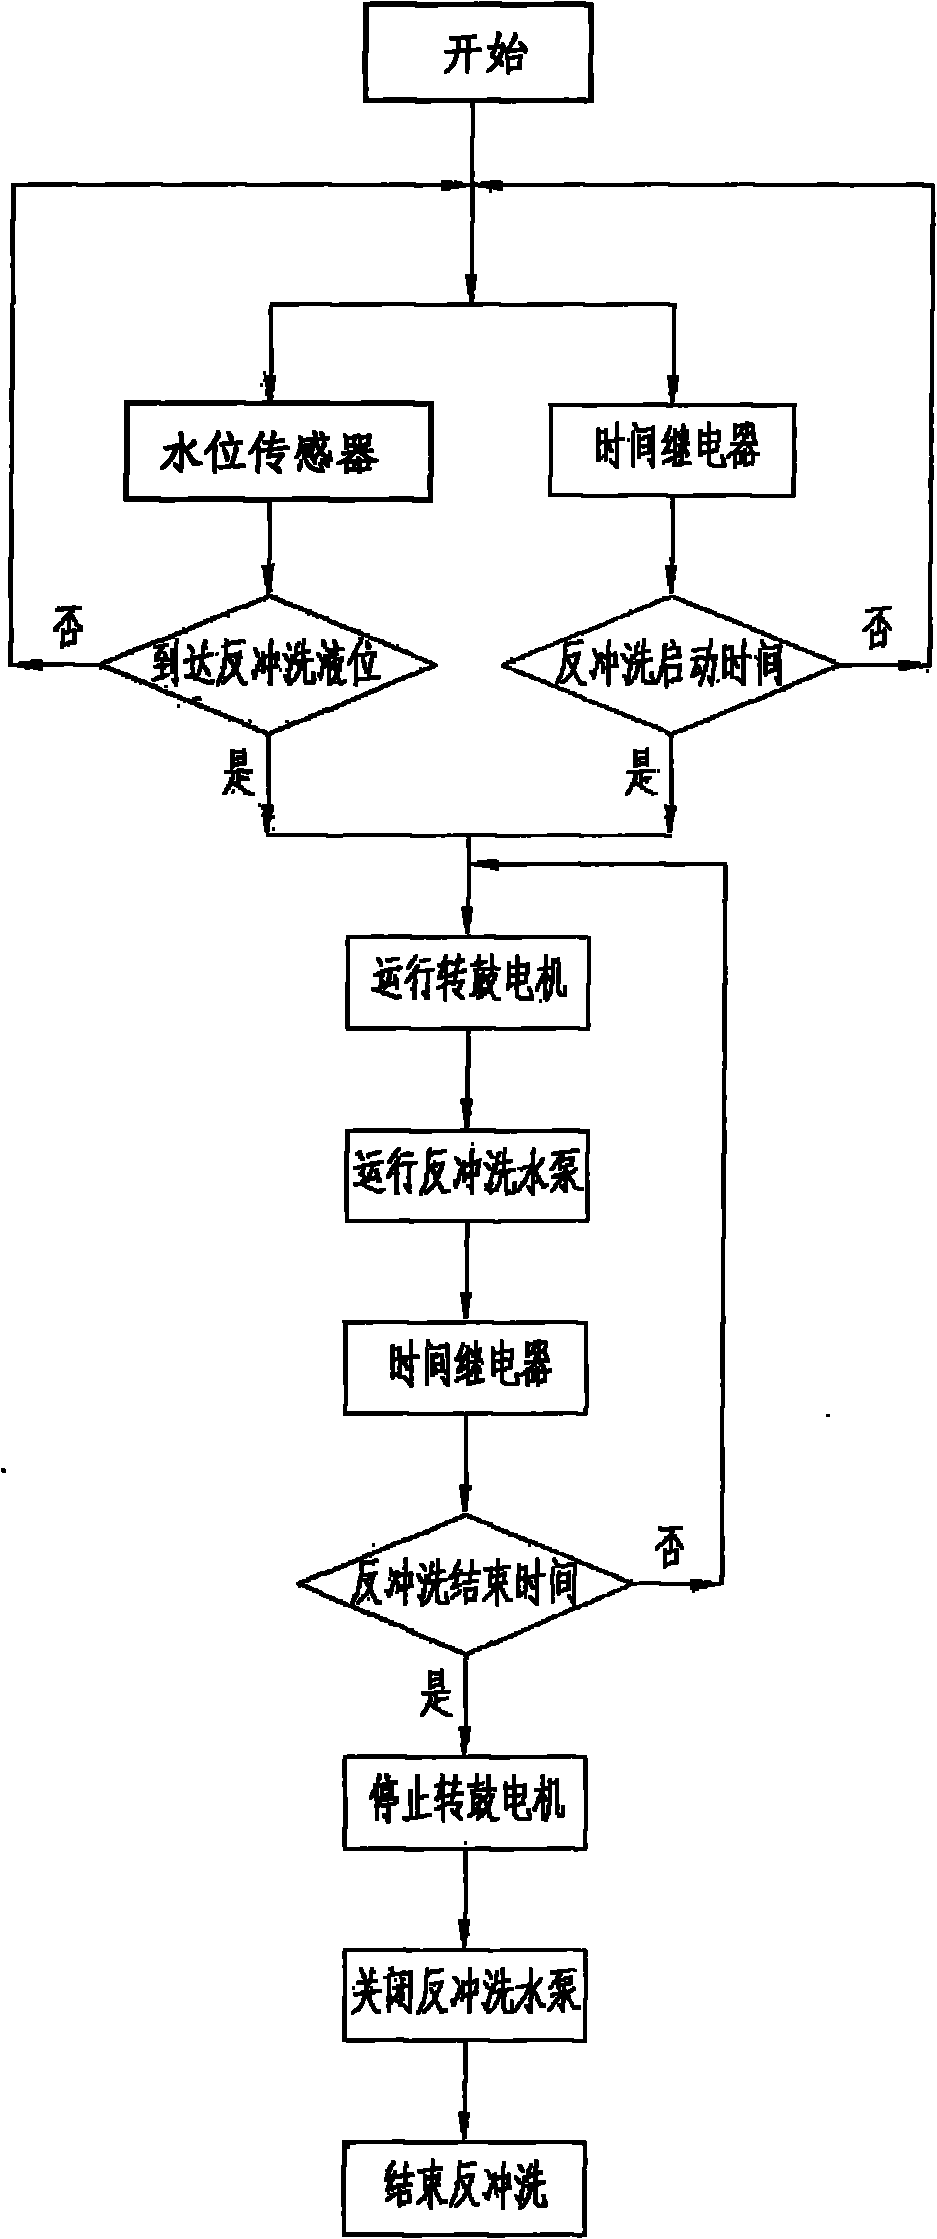 Method and filtering system for removing solid suspended particles from aquaculture system